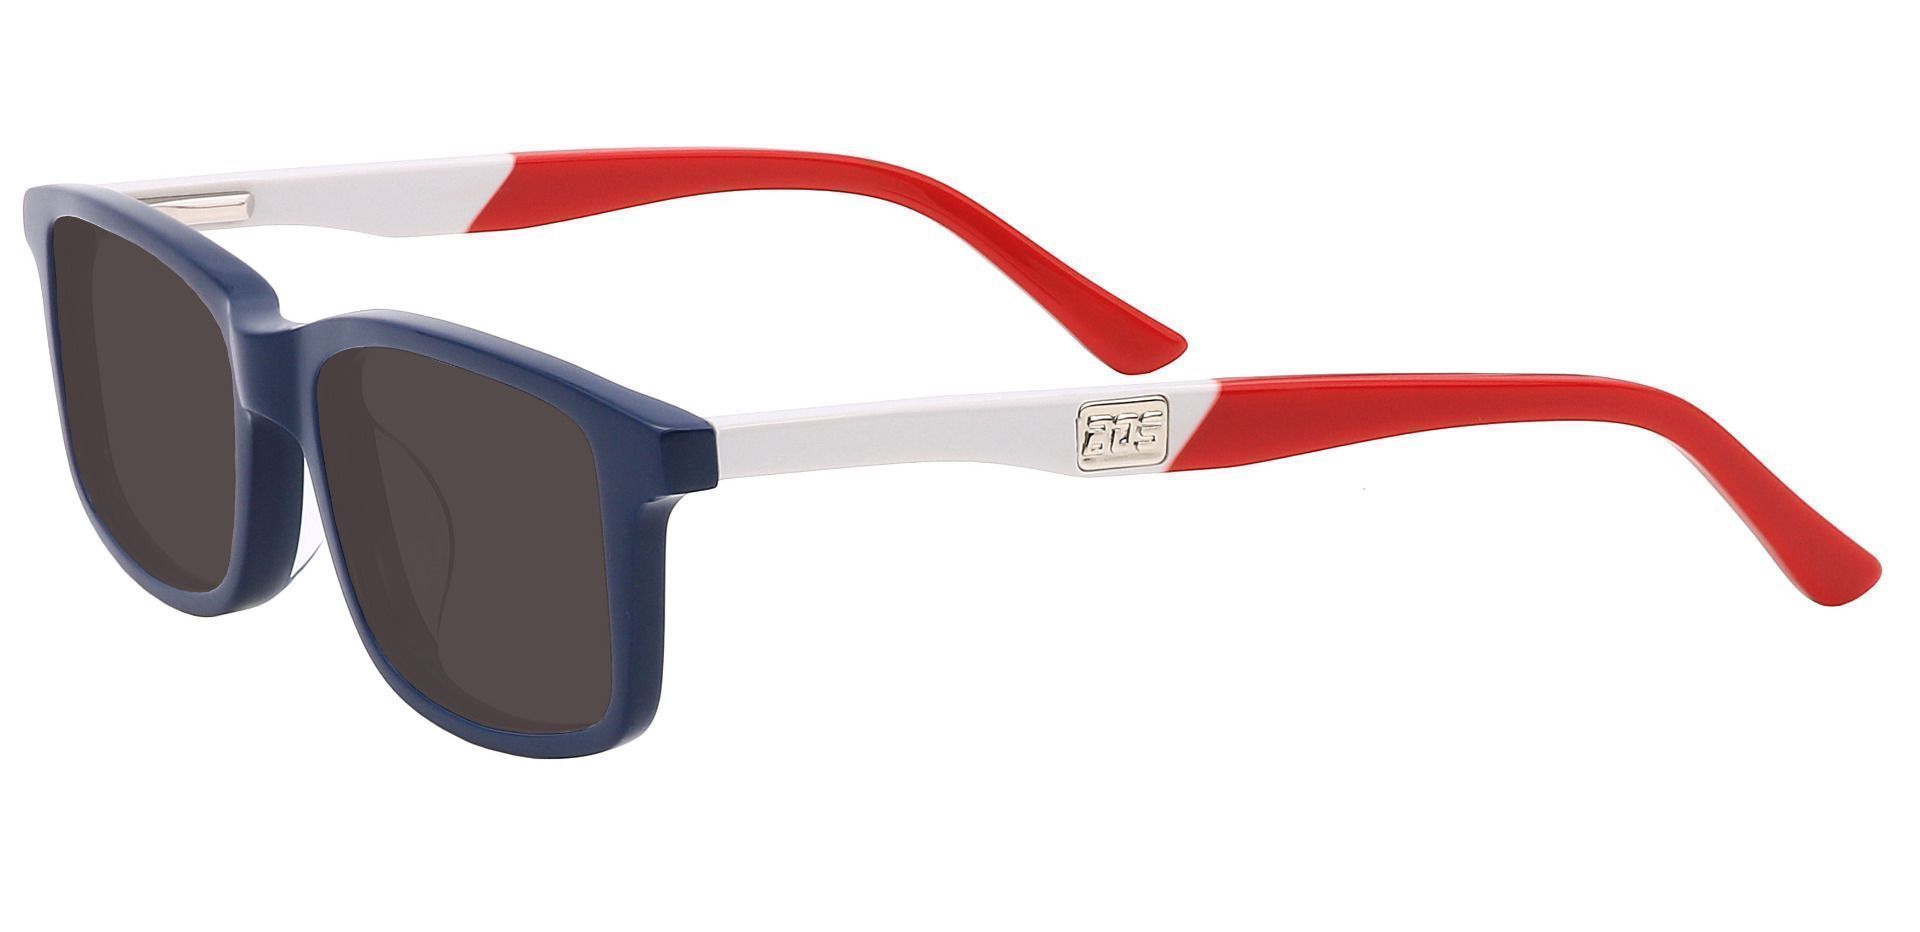 Hub Rectangle Non-Rx Sunglasses - Blue Frame With Gray Lenses